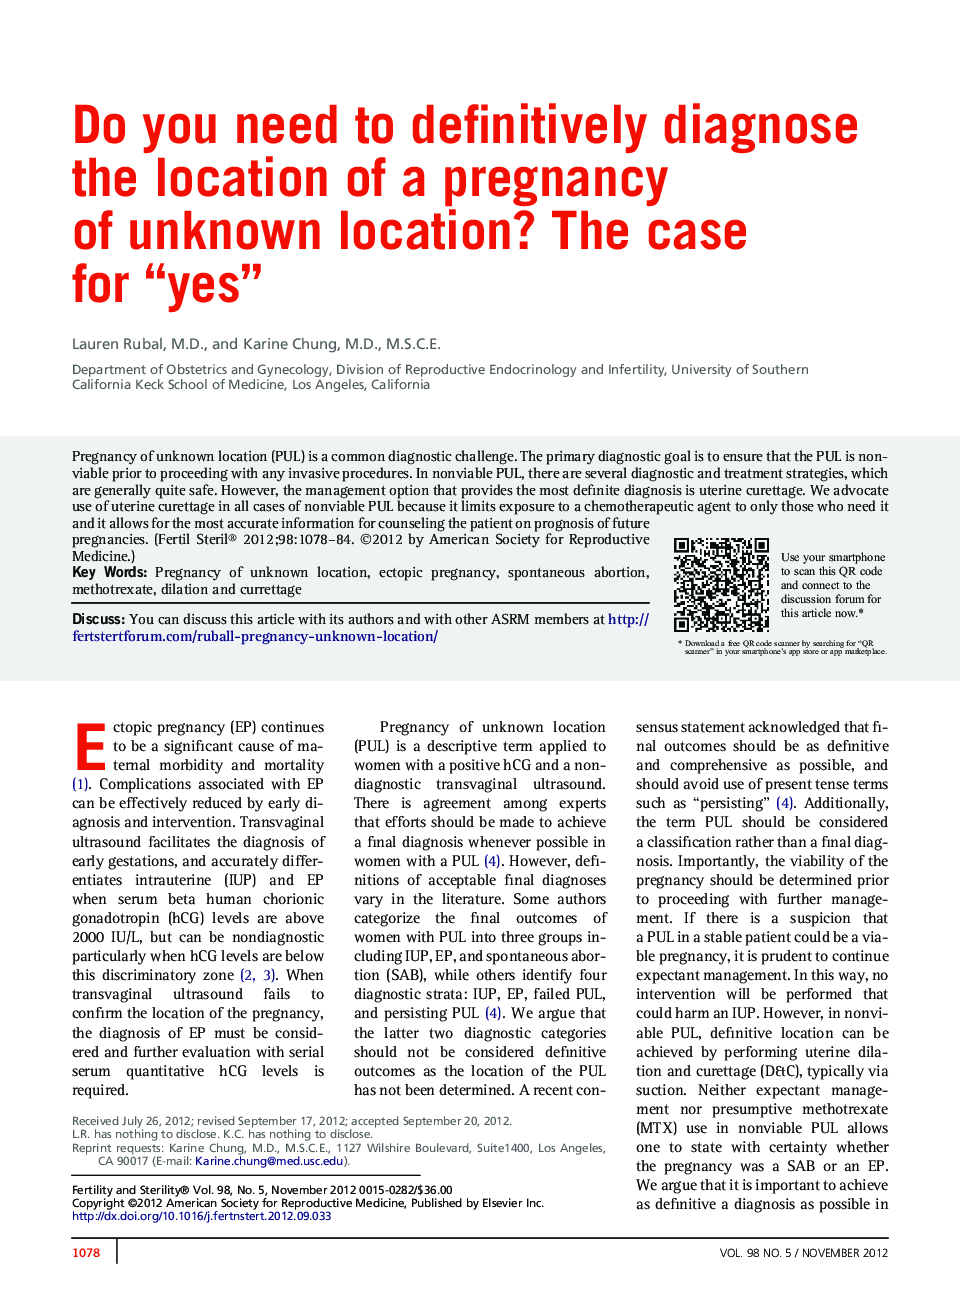 Do you need to definitively diagnose the location of a pregnancy of unknown location? The case for “yes” 